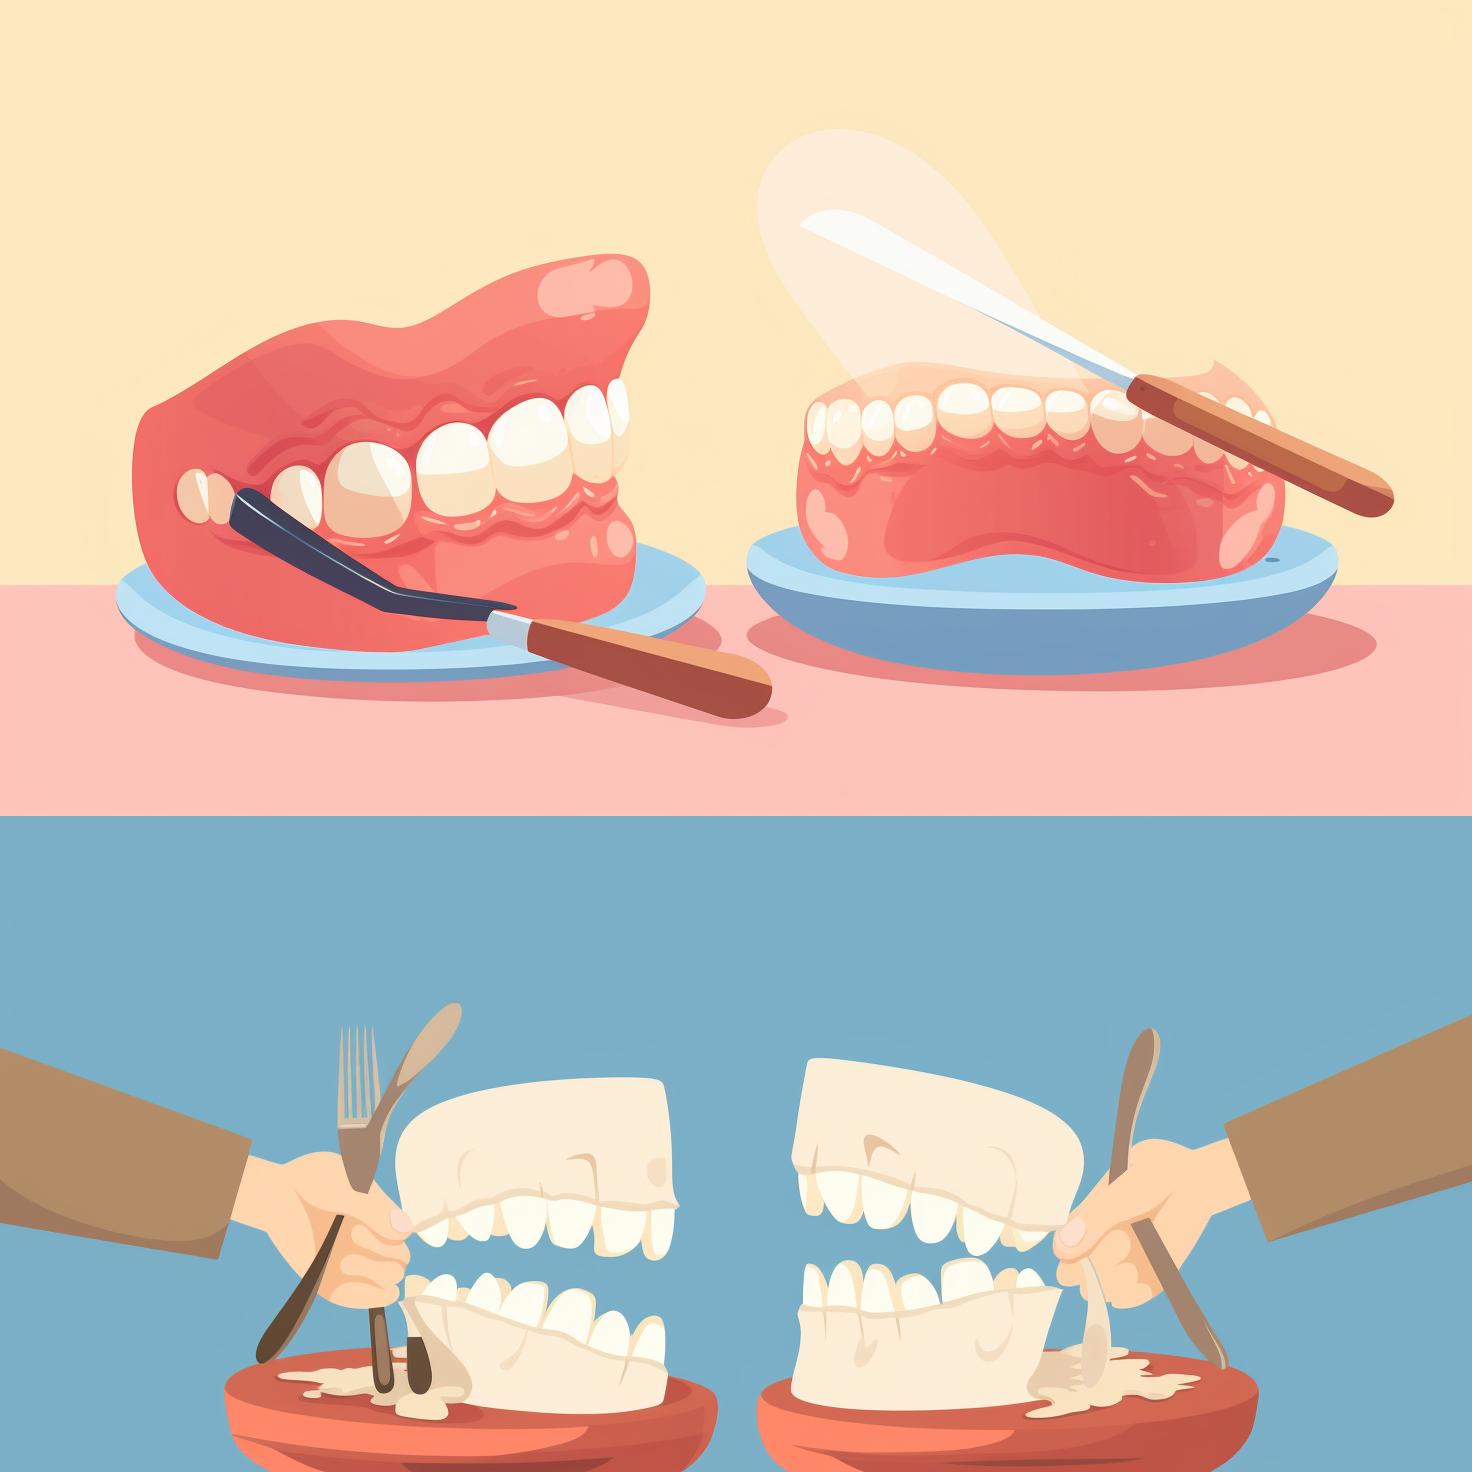 A pair of dentures being cleaned with a soft brush